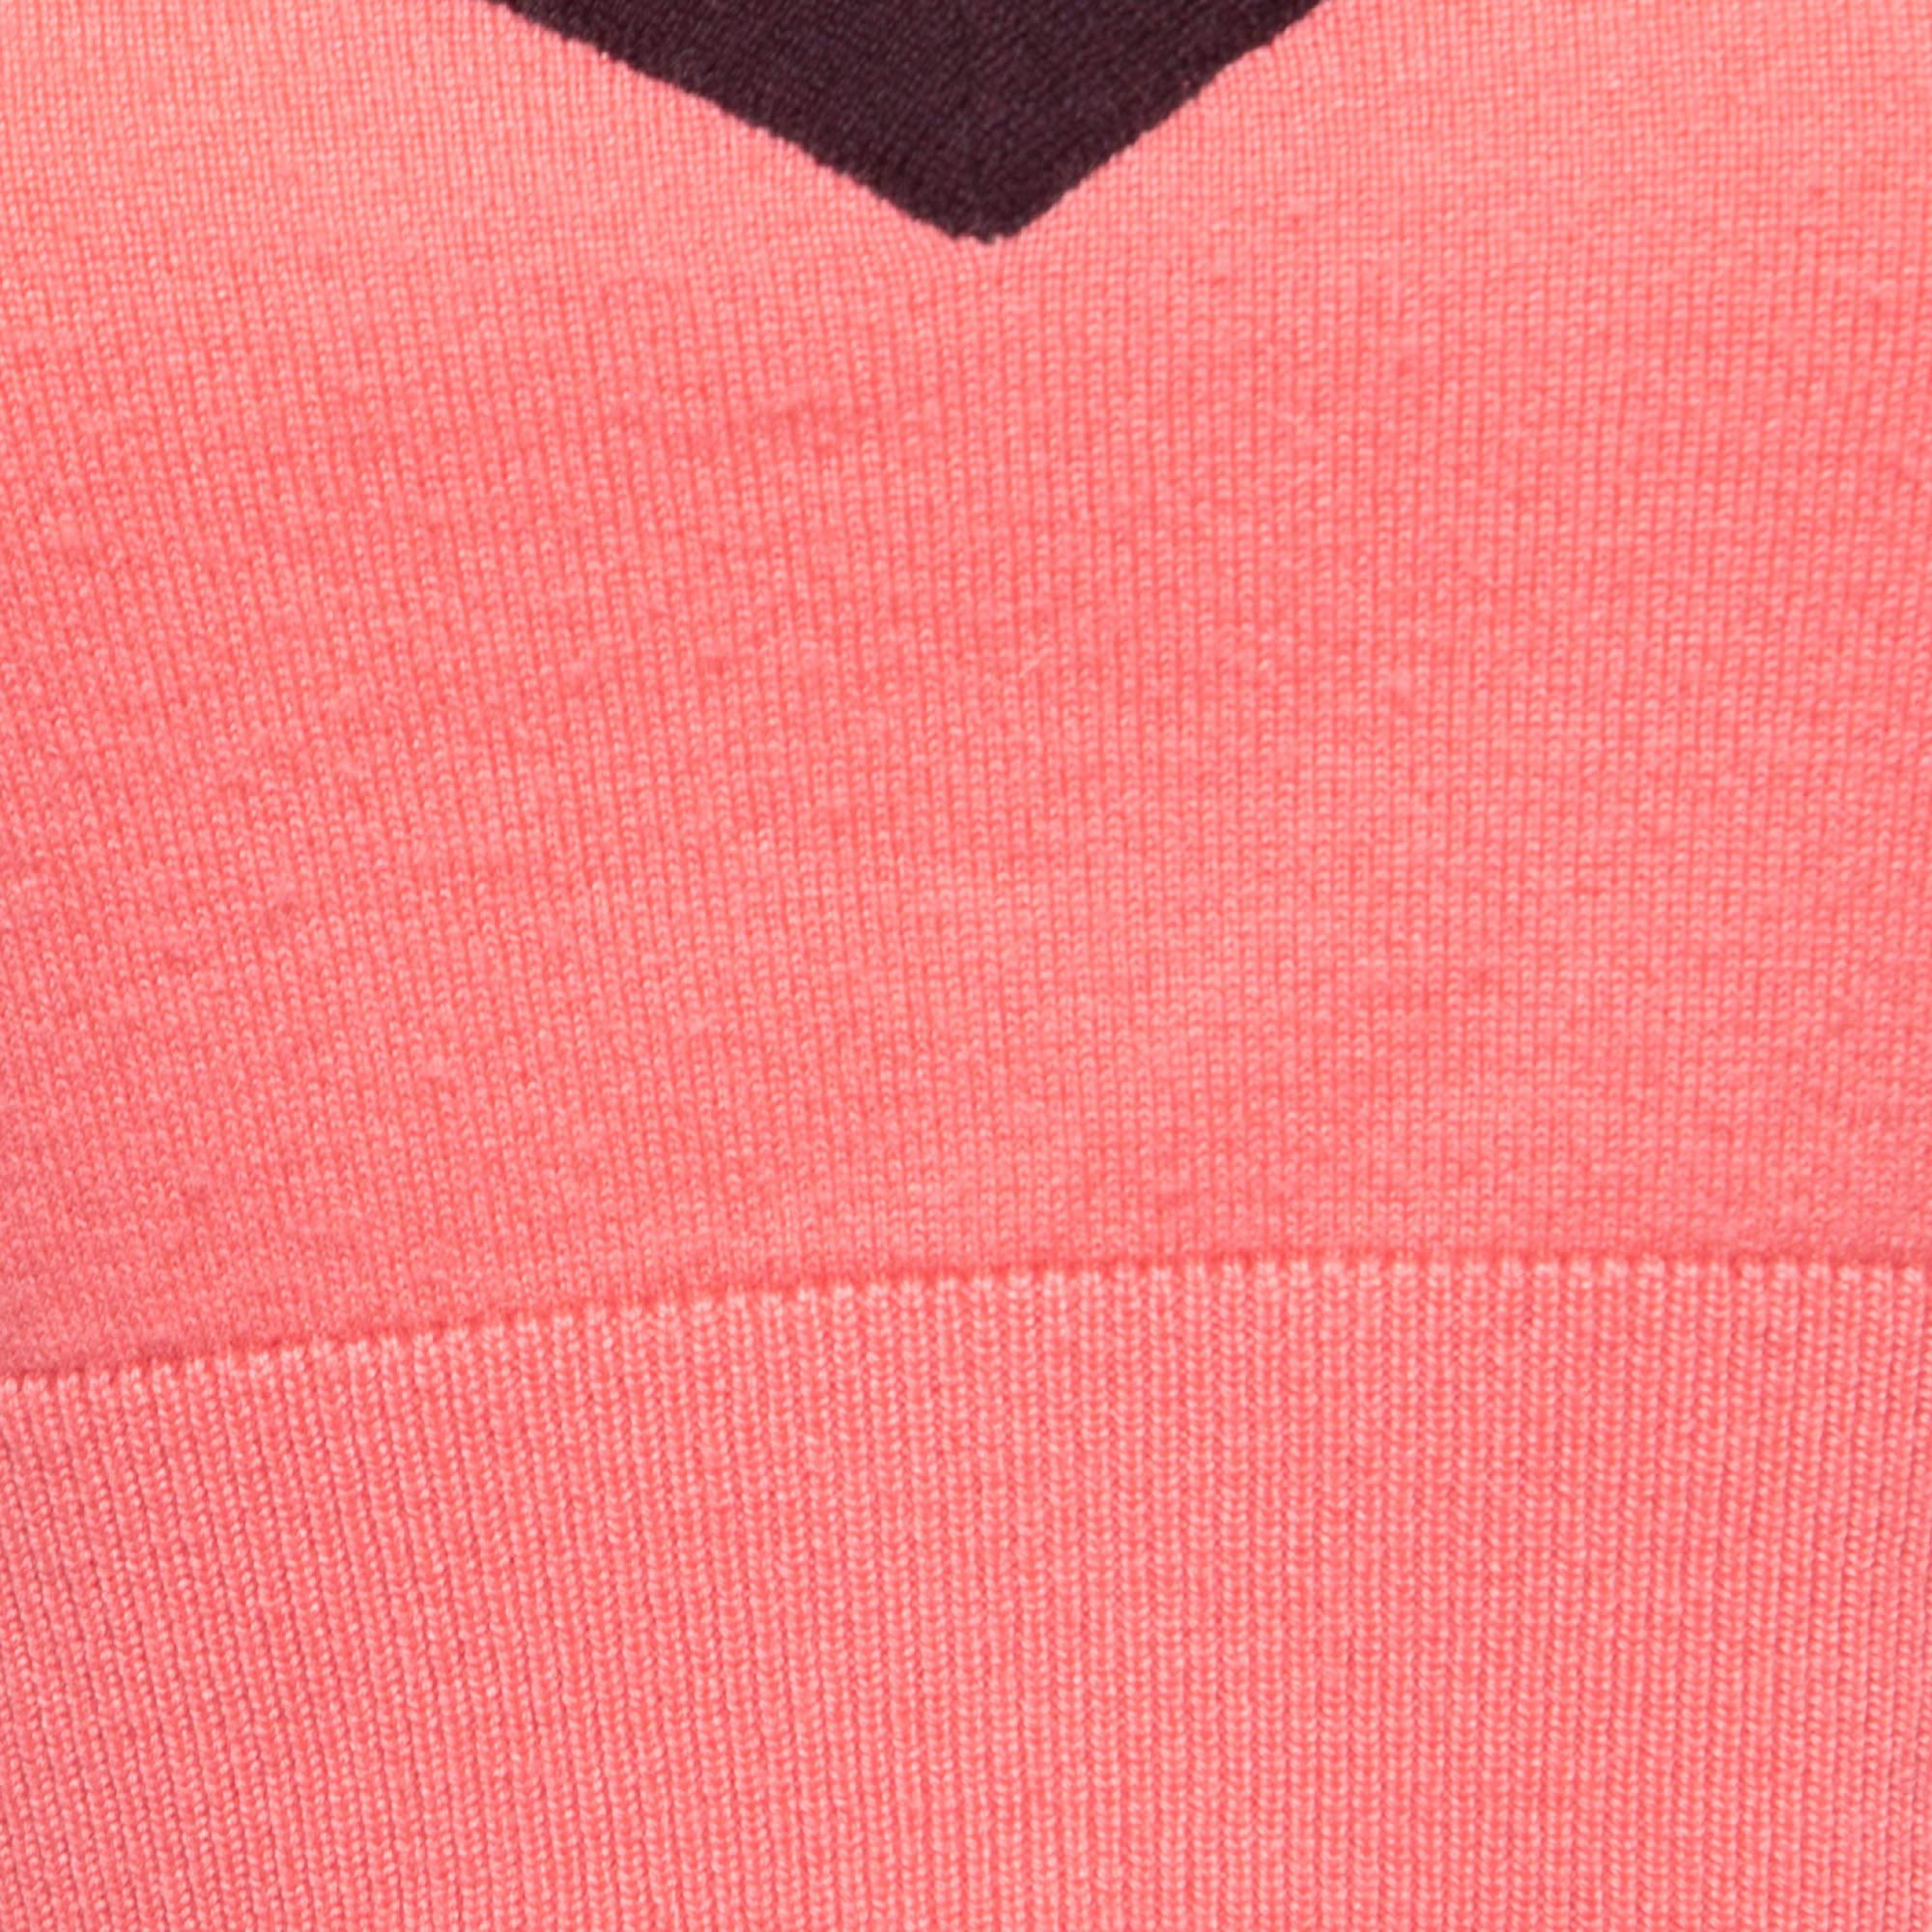 Chanel Pink & Plum Cashmere Cropped Knit Top M 1